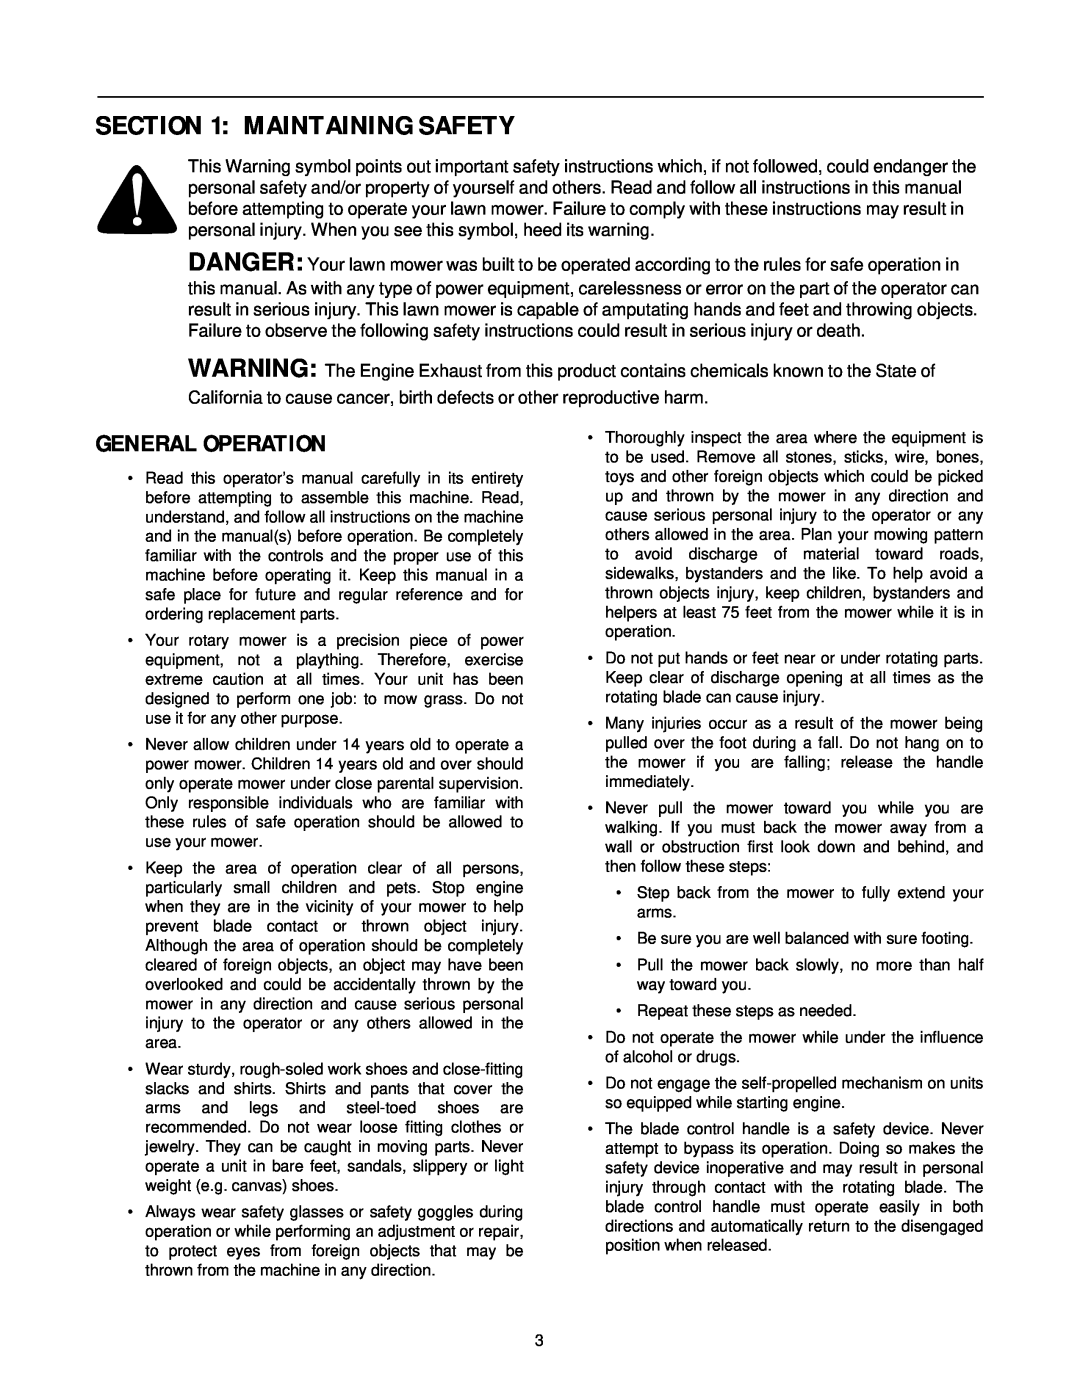 Yard-Man 11A-589 Series manual Maintaining Safety, General Operation 